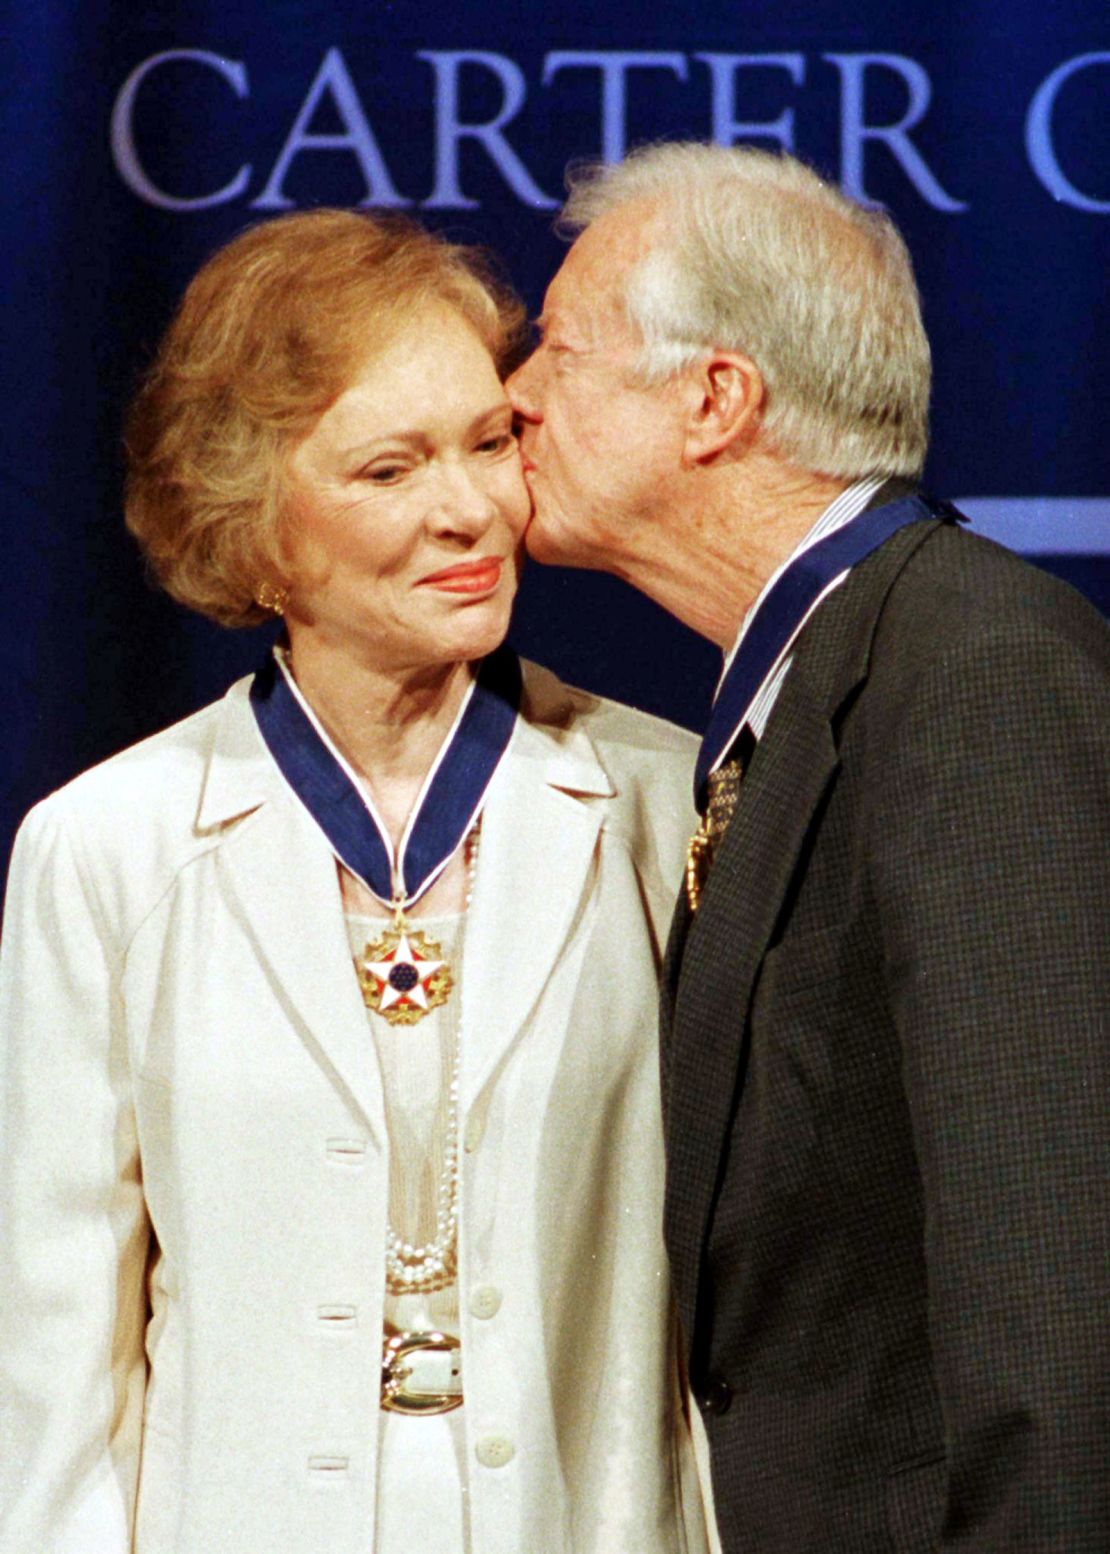 Former President Jimmy Carter (R) kisses former first lady Rosalynn Carter on the cheek after they received the Presidential Medal of Freedom, the nations' highest honor, from President Bill Clinton during a ceremony at the Carter Center in Atlanta, August 9. The Carters were presented with the medals for the work they have done since leaving the White House in 1980.